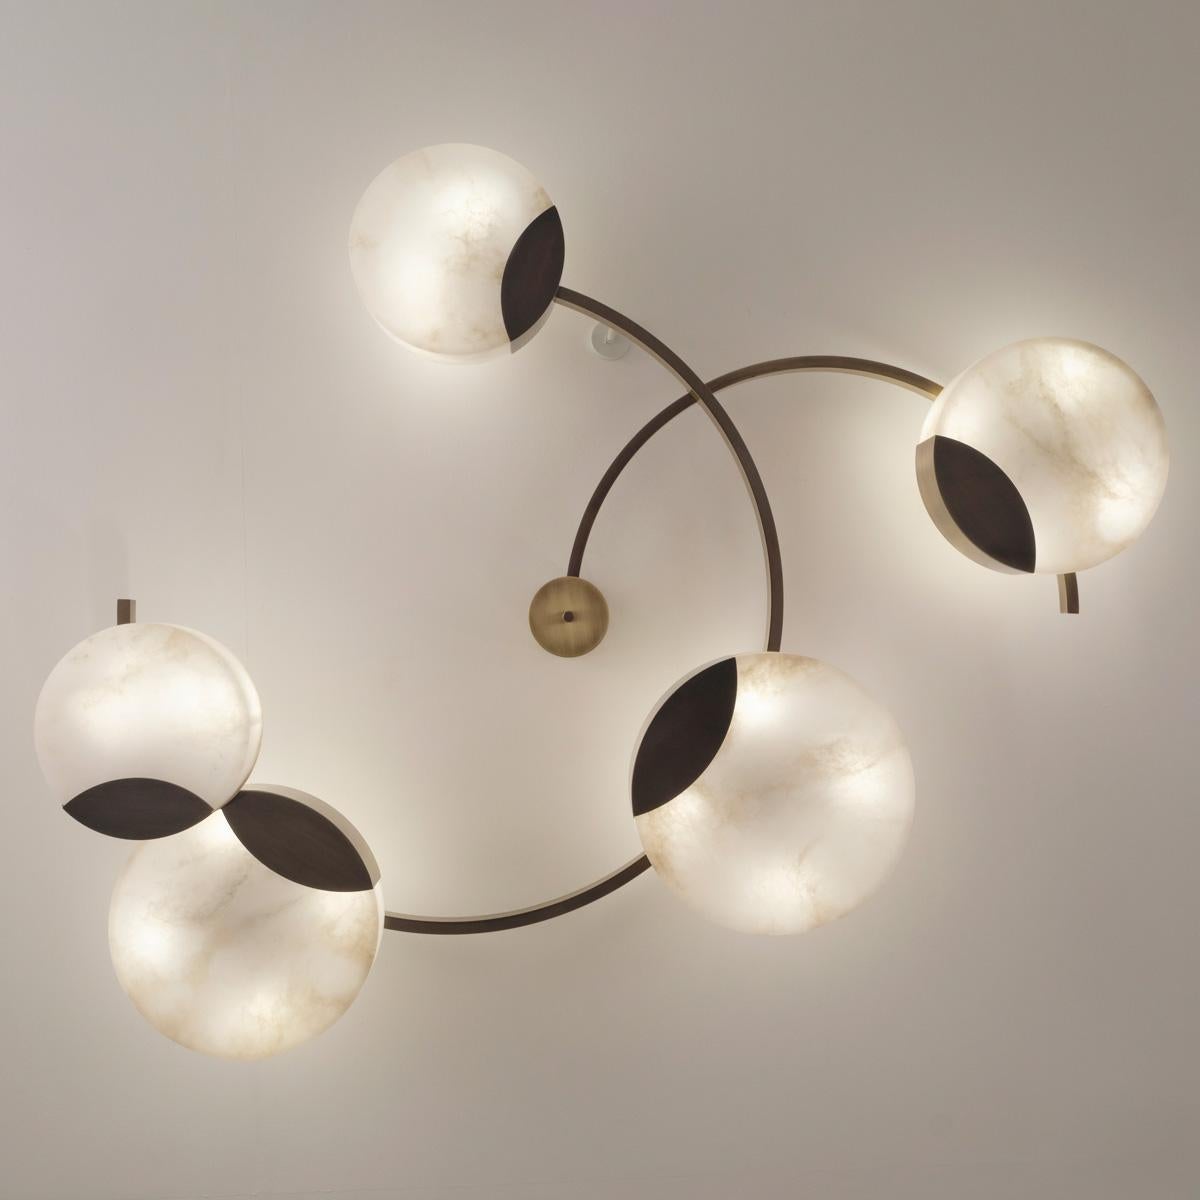 Cloud N.5 Ceiling Light by Gaspare Asaro-Bronze Finish In New Condition For Sale In New York, NY